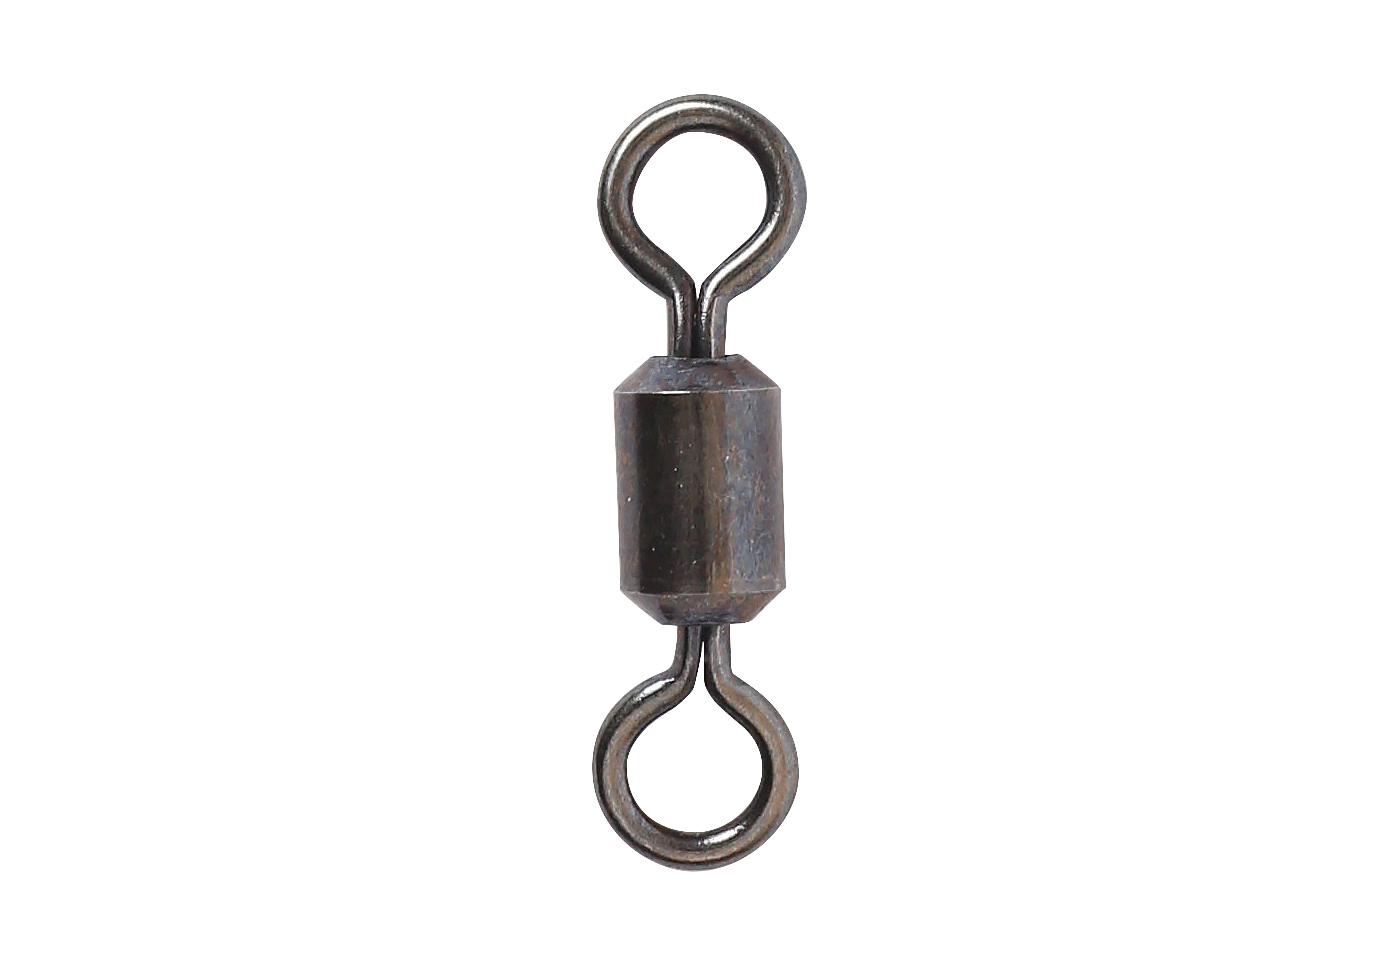 Snagless Snap with Barrel Swivel – Owner Hooks